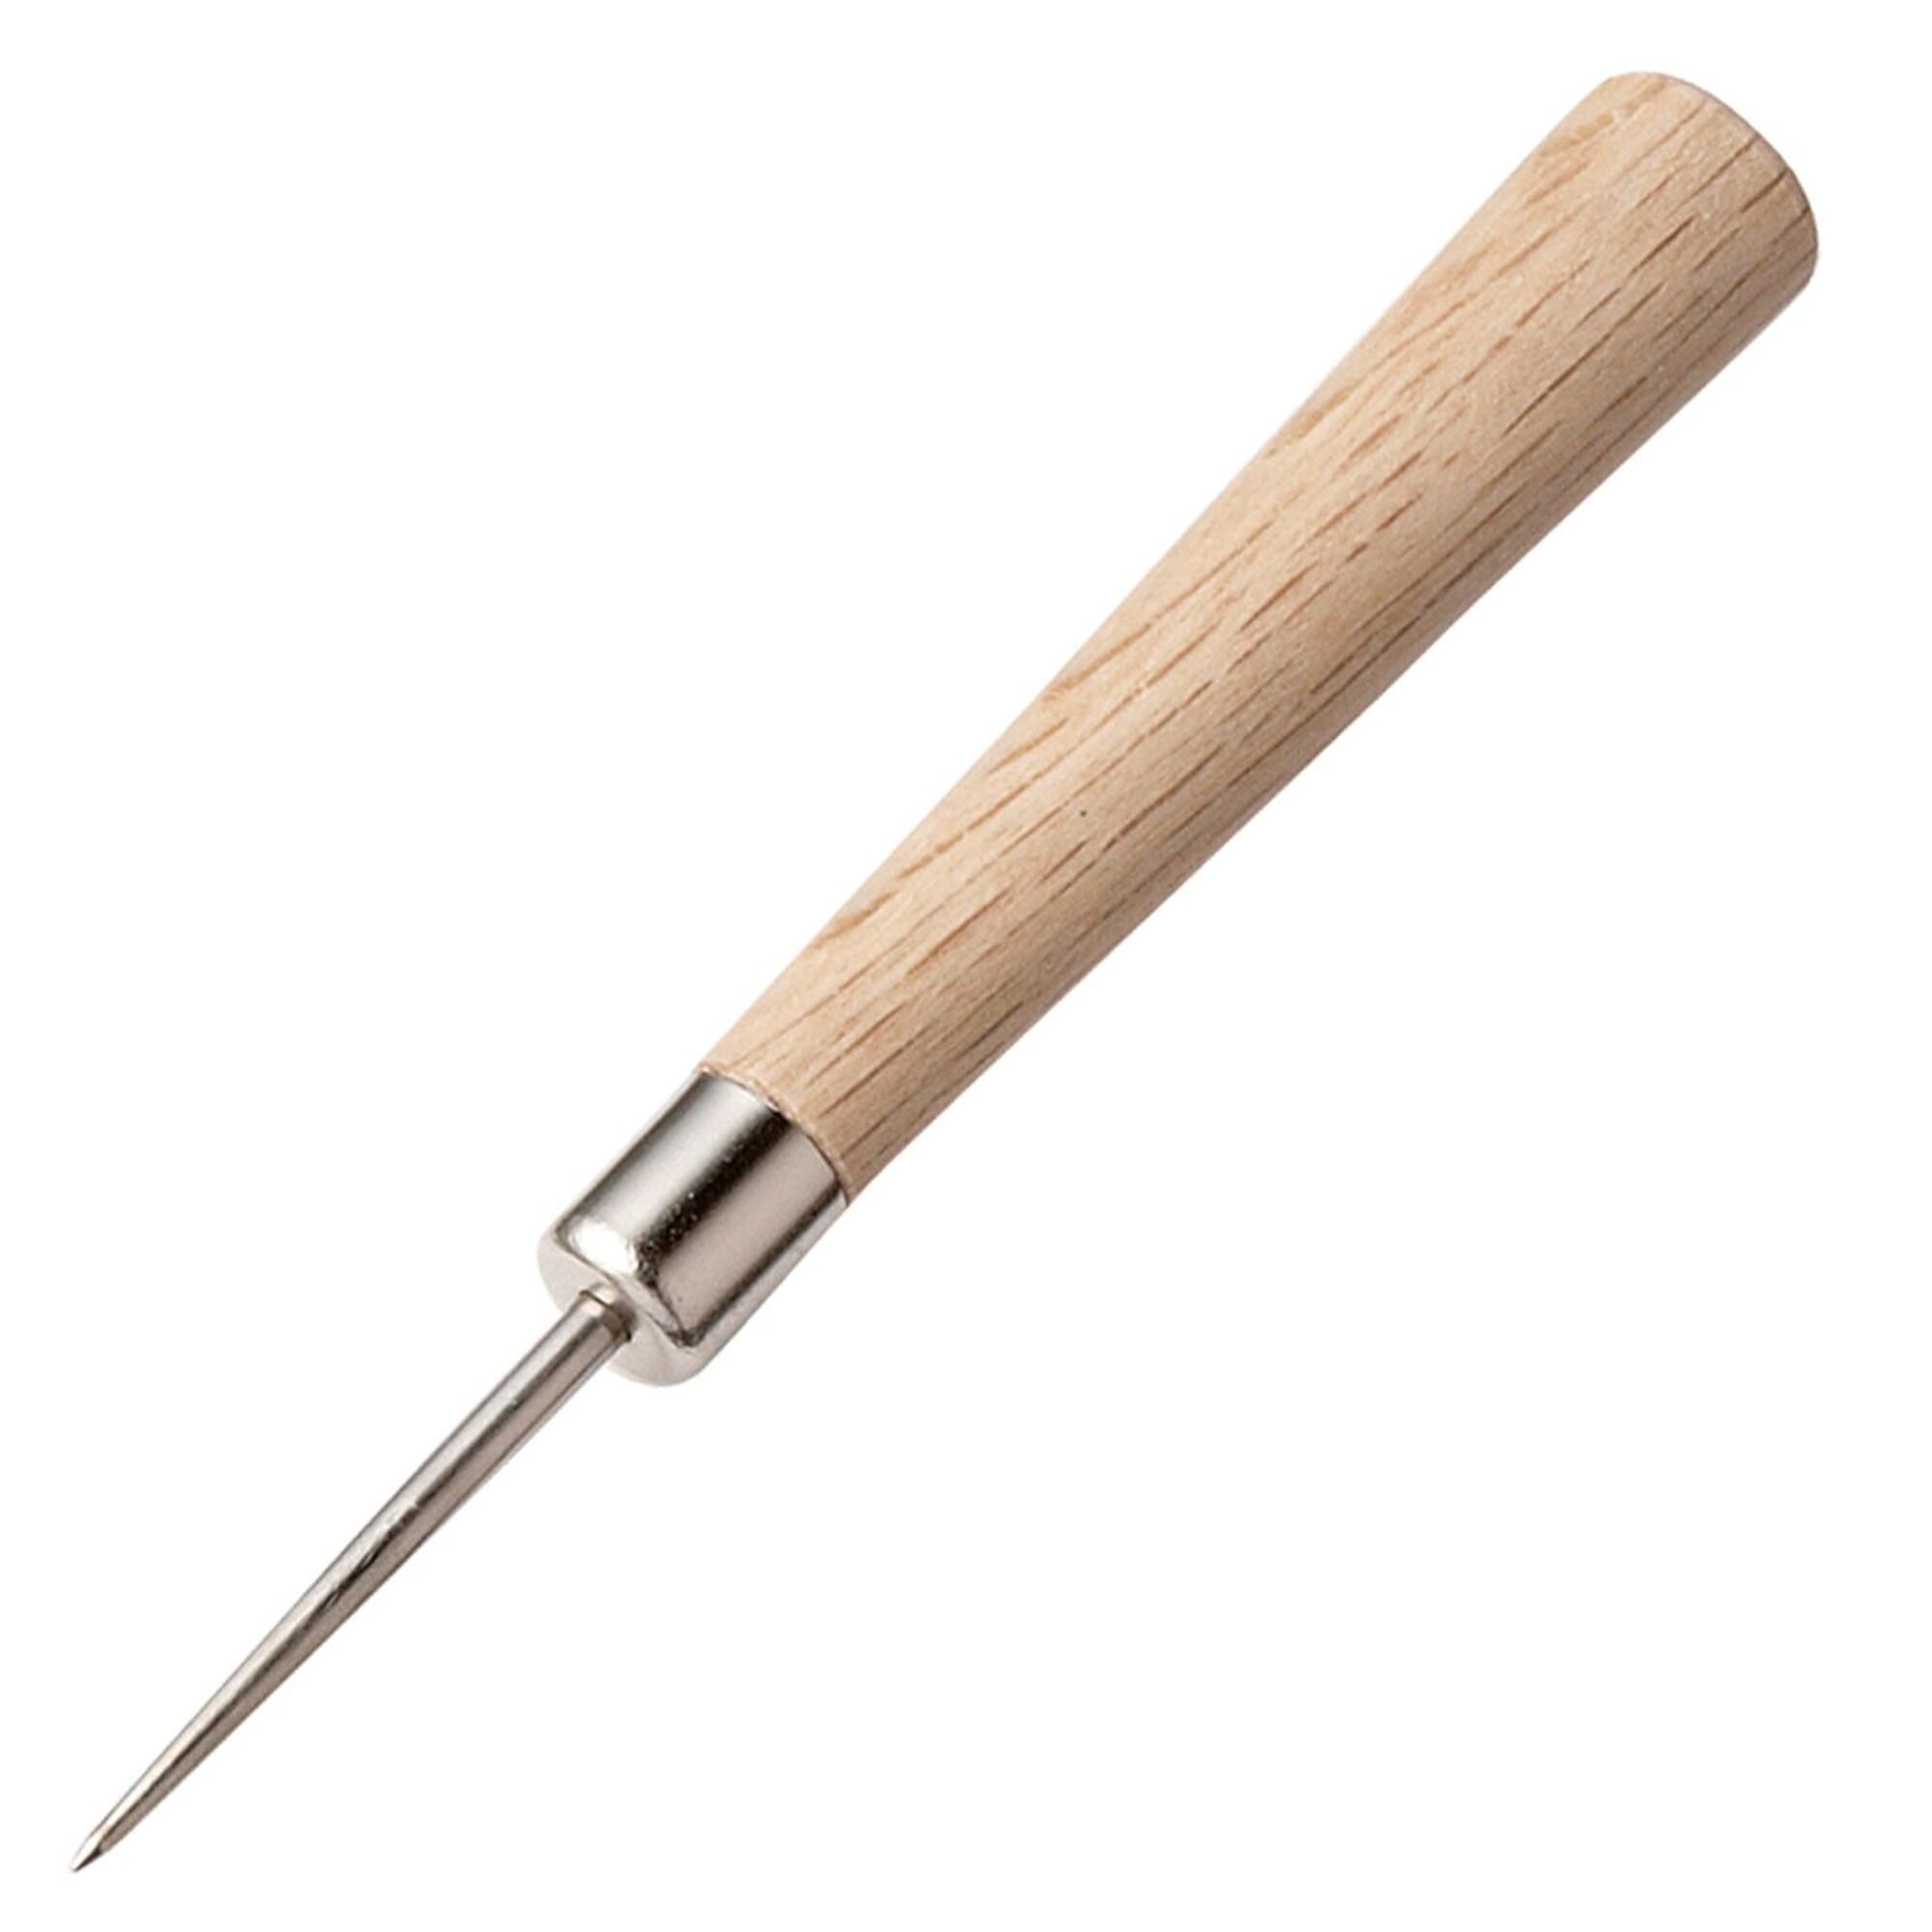 Kyoshin Elle Leathercraft Tool Diamond Point Curved Stitching Leather Awl, with Wooden Handle, for Leather Hand Sewing